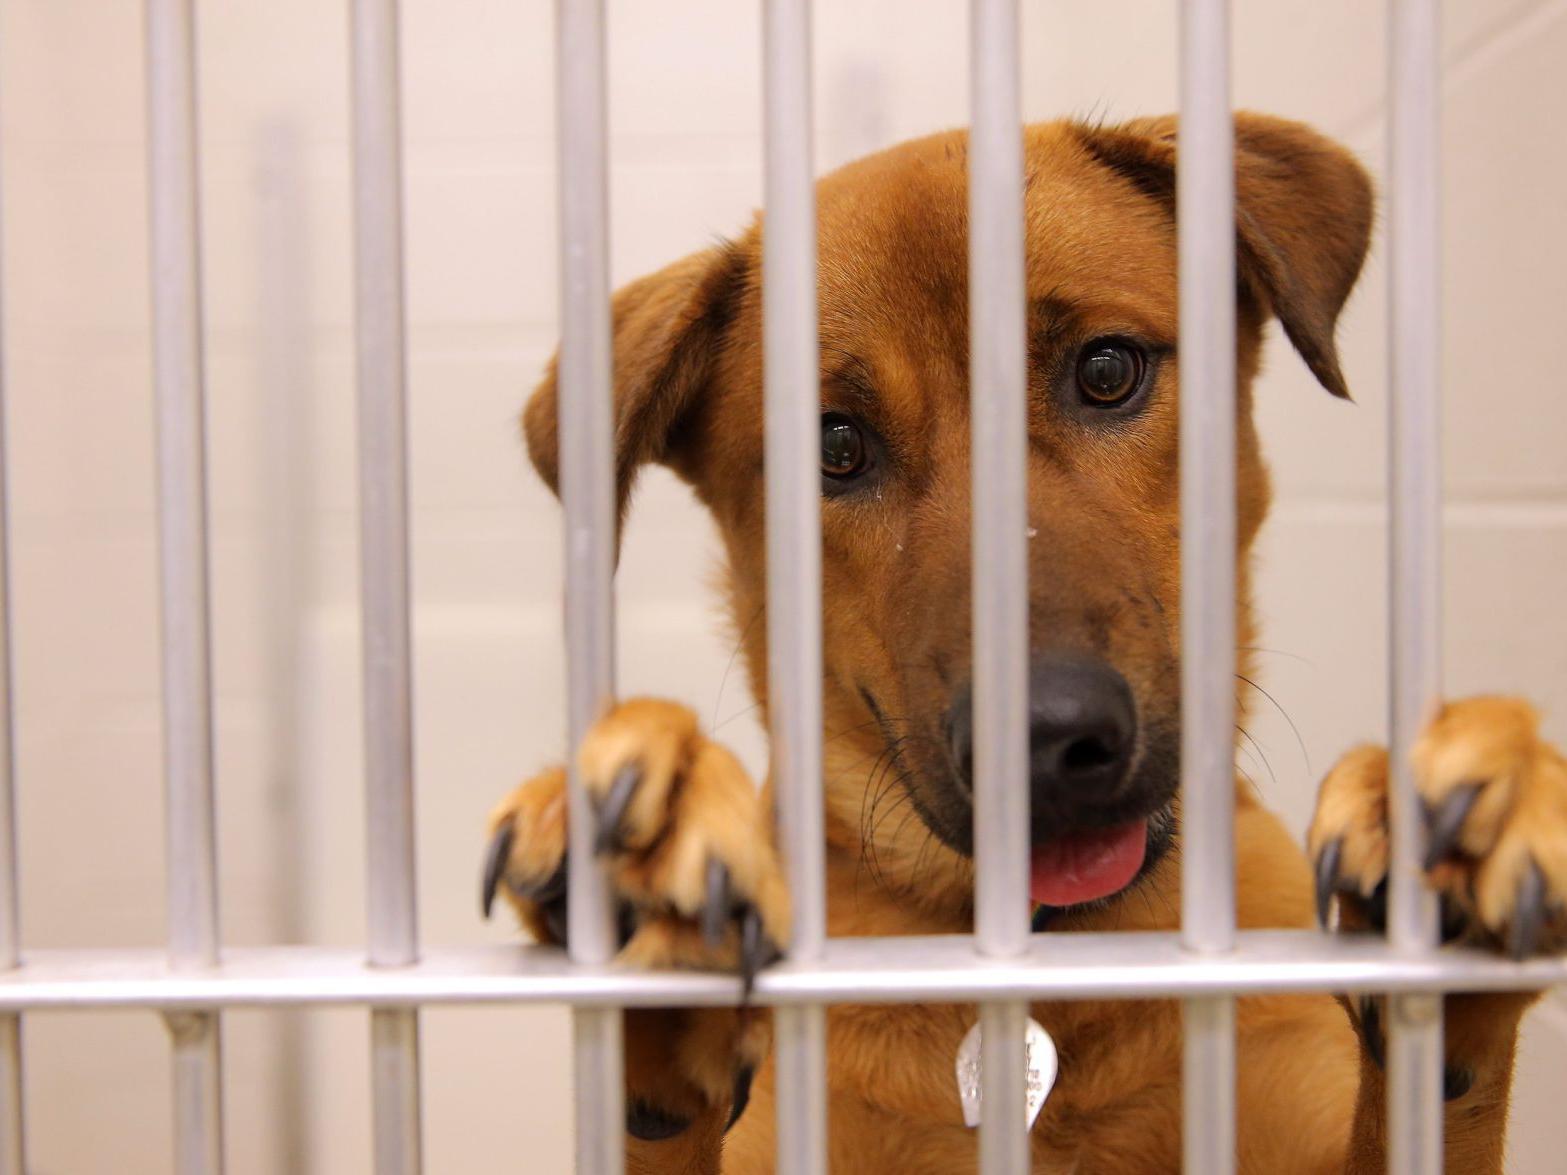 Dirty Kennels And Thin Dogs Lead To Lawsuit Against Missouri